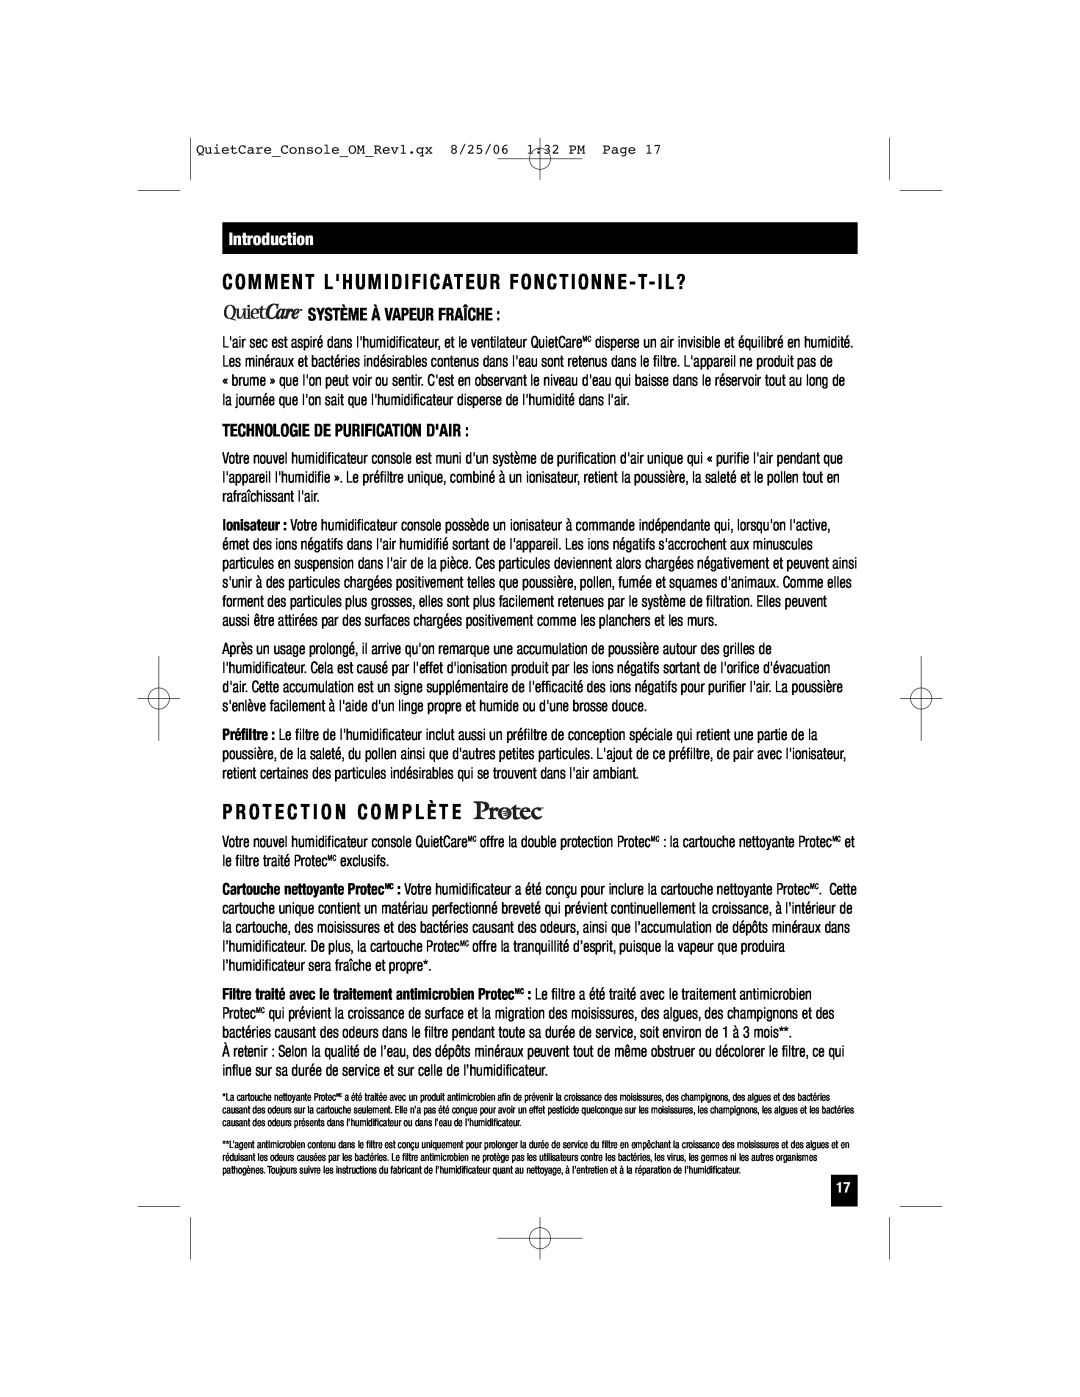 Honeywell HCM-6009 owner manual Comment Lhumidificateur Fonctionne - T- Il?, P R O T E C T I O N C O M P L È T E 